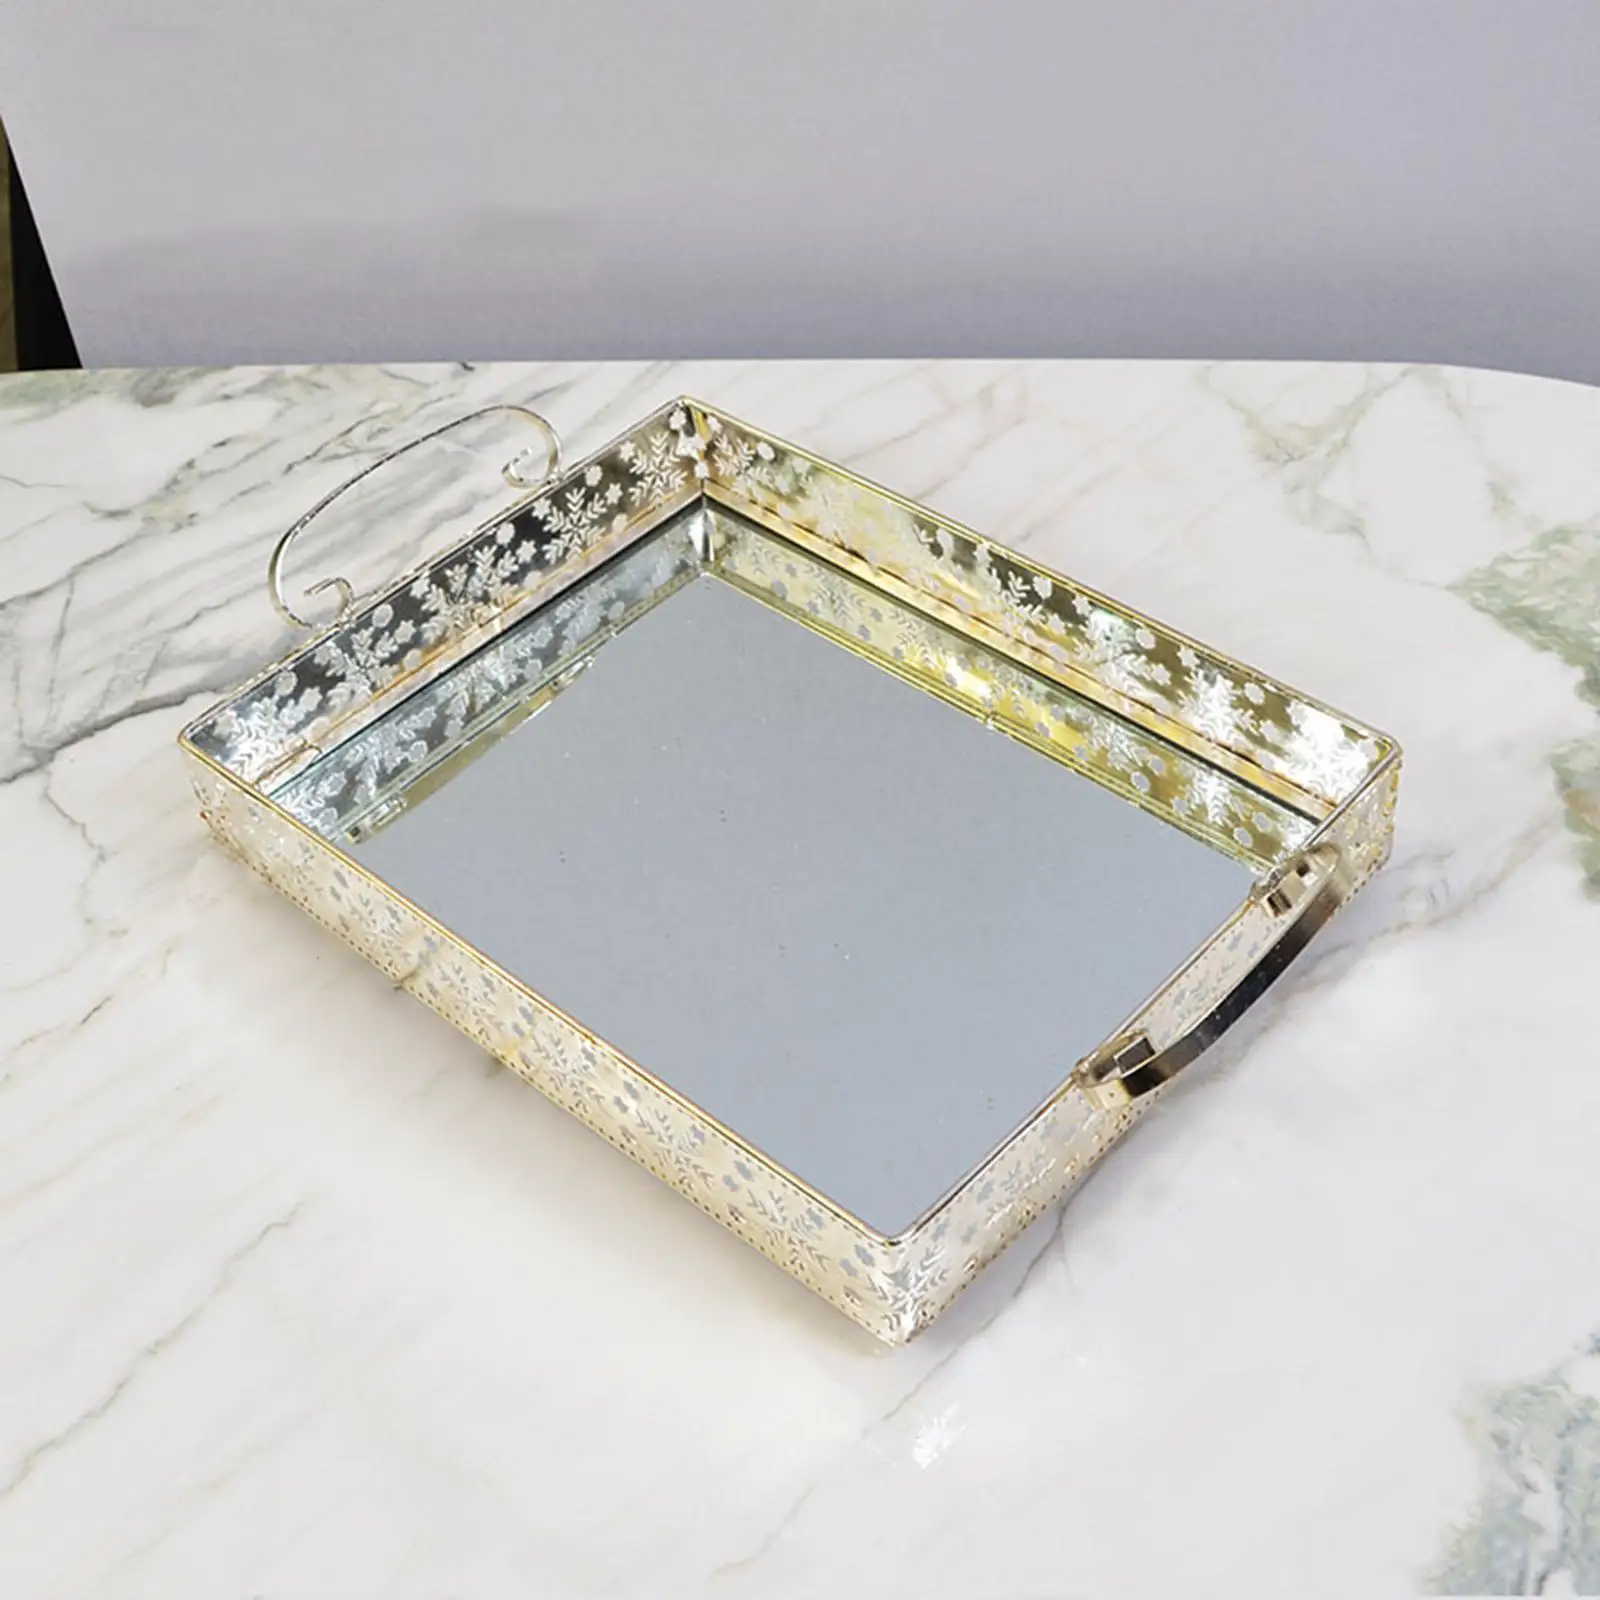 Cosmetic Makeup Tray Table Centerpiece Mirrored Jewelry Trinket Tray Decorative Mirror Tray for Wedding Bedroom Dresser Bathroom